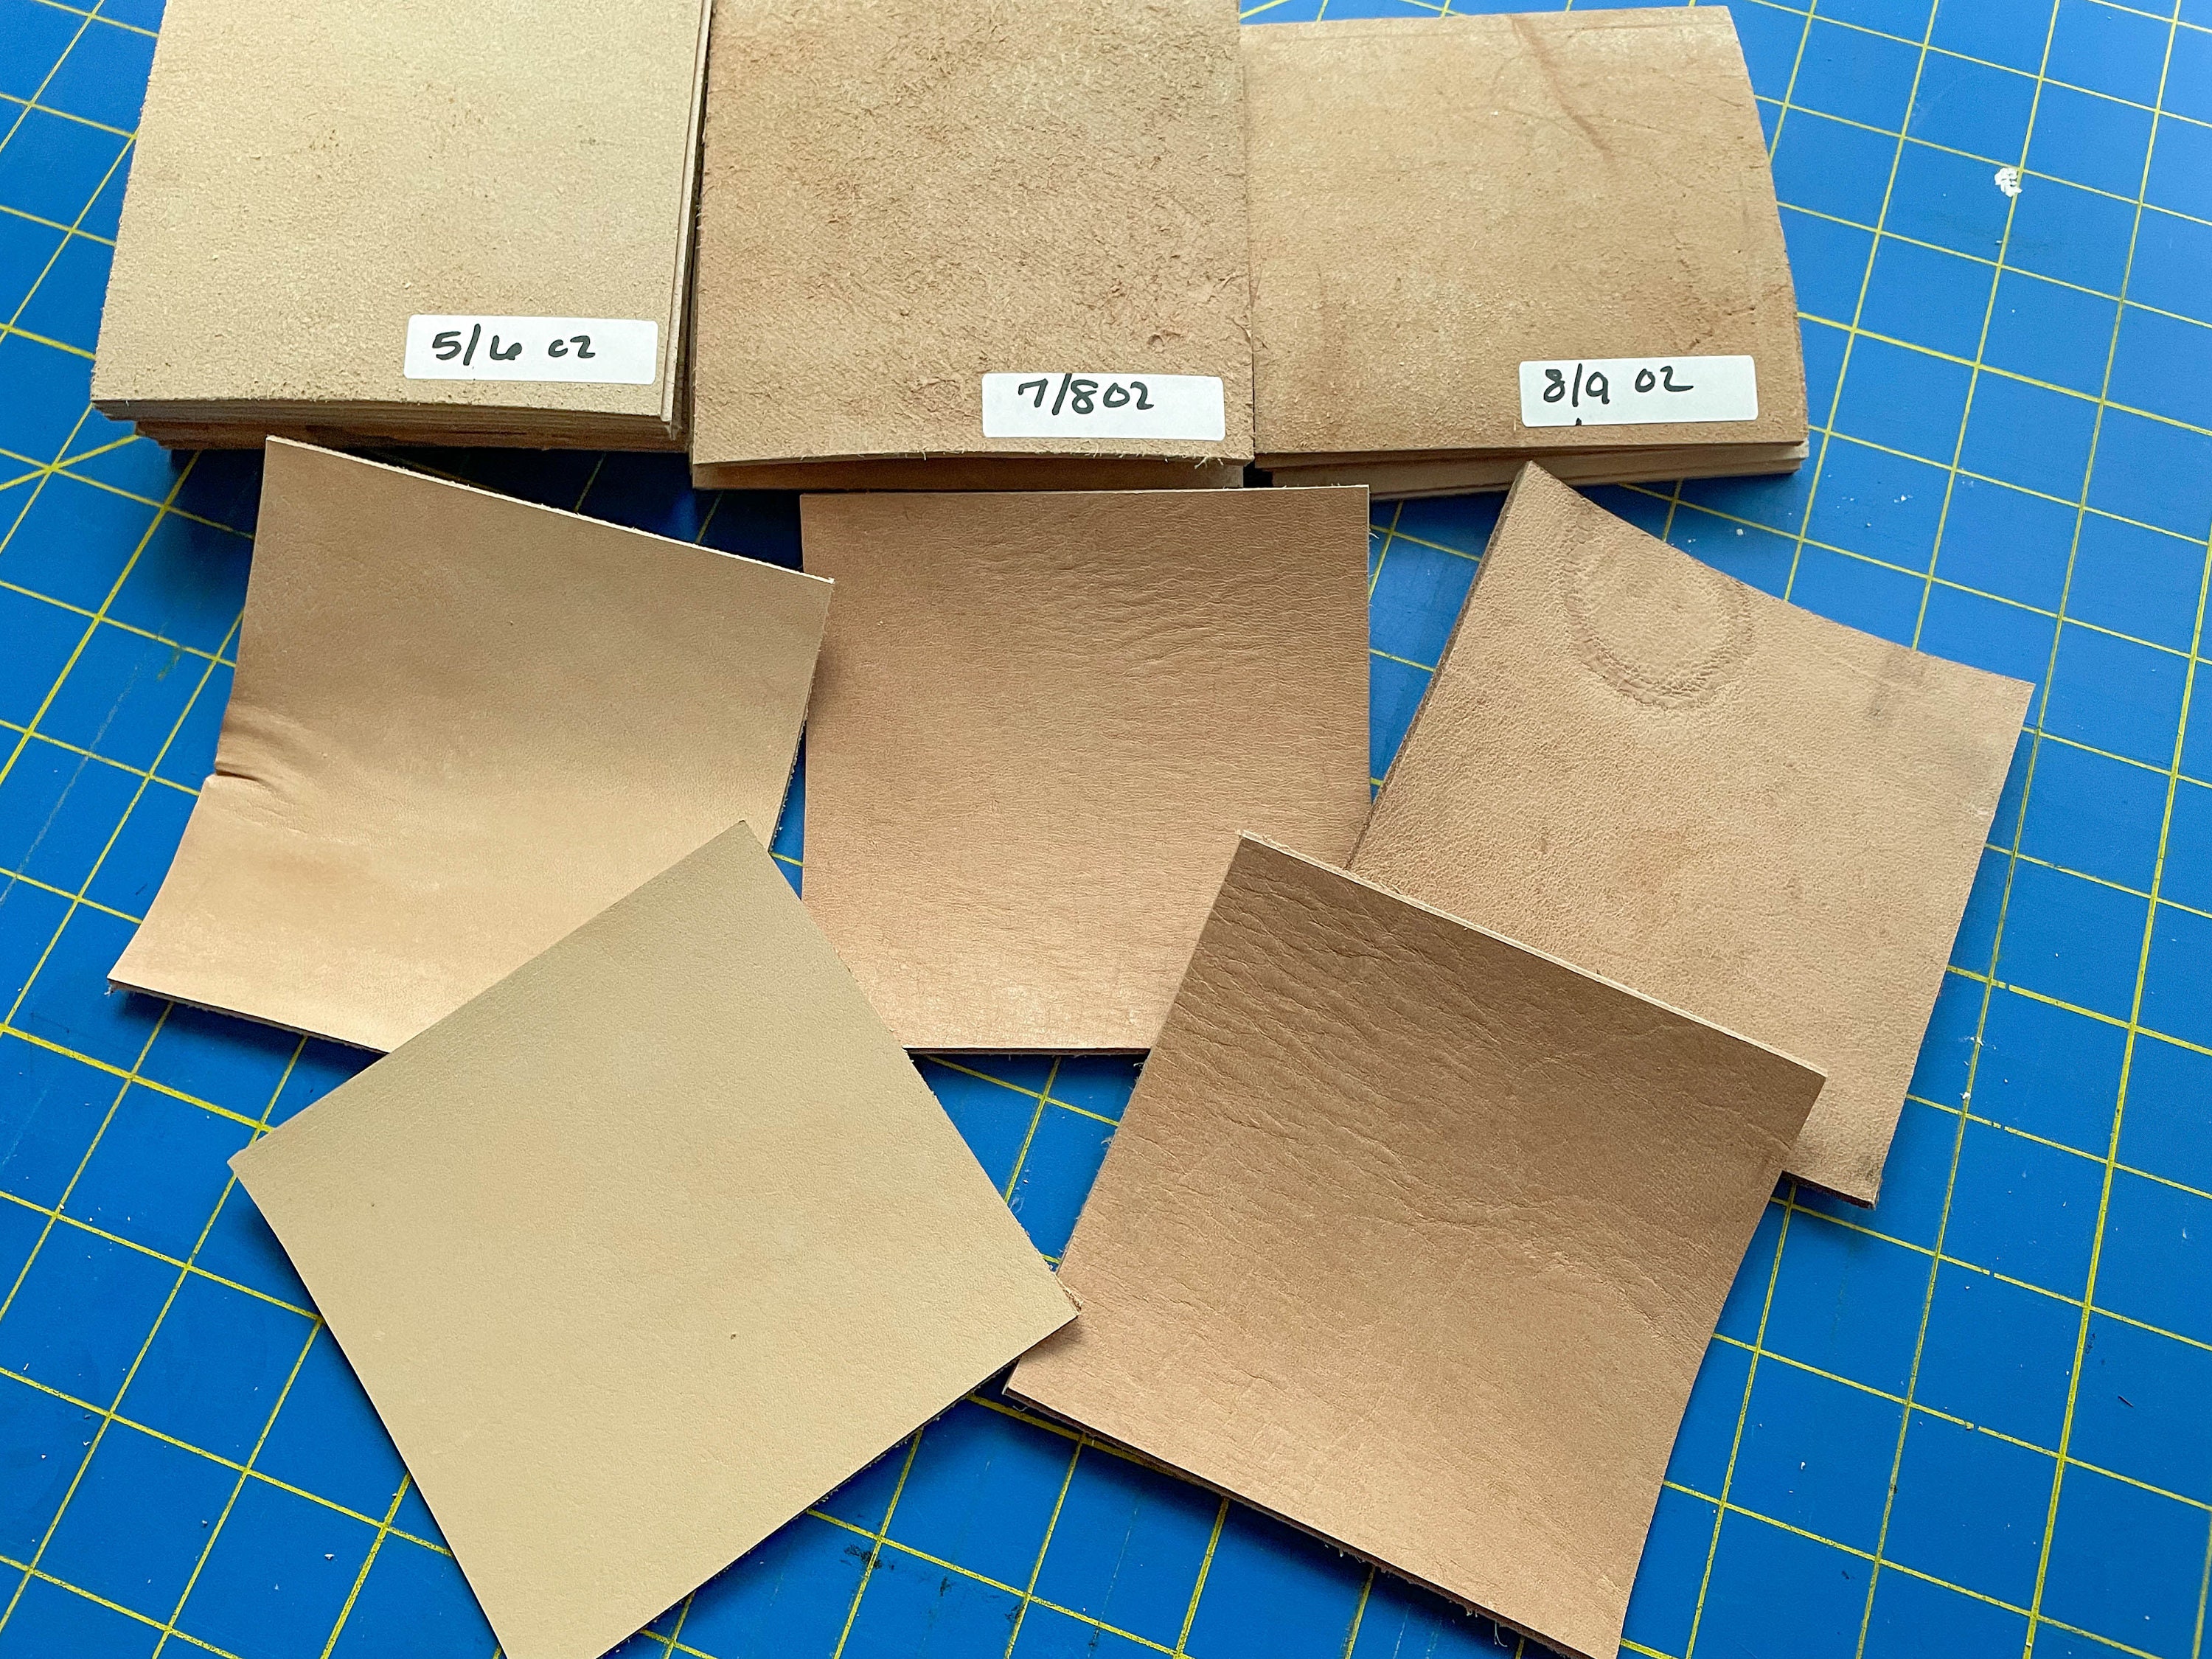 Black-3.0mm, 12x24 Firm Vegetable Tanned Full Grain Tooling Leather Thick Cowhide Handmade Stiff Leather Material for Craft/Tooling/Caving/Hobby Workshop 